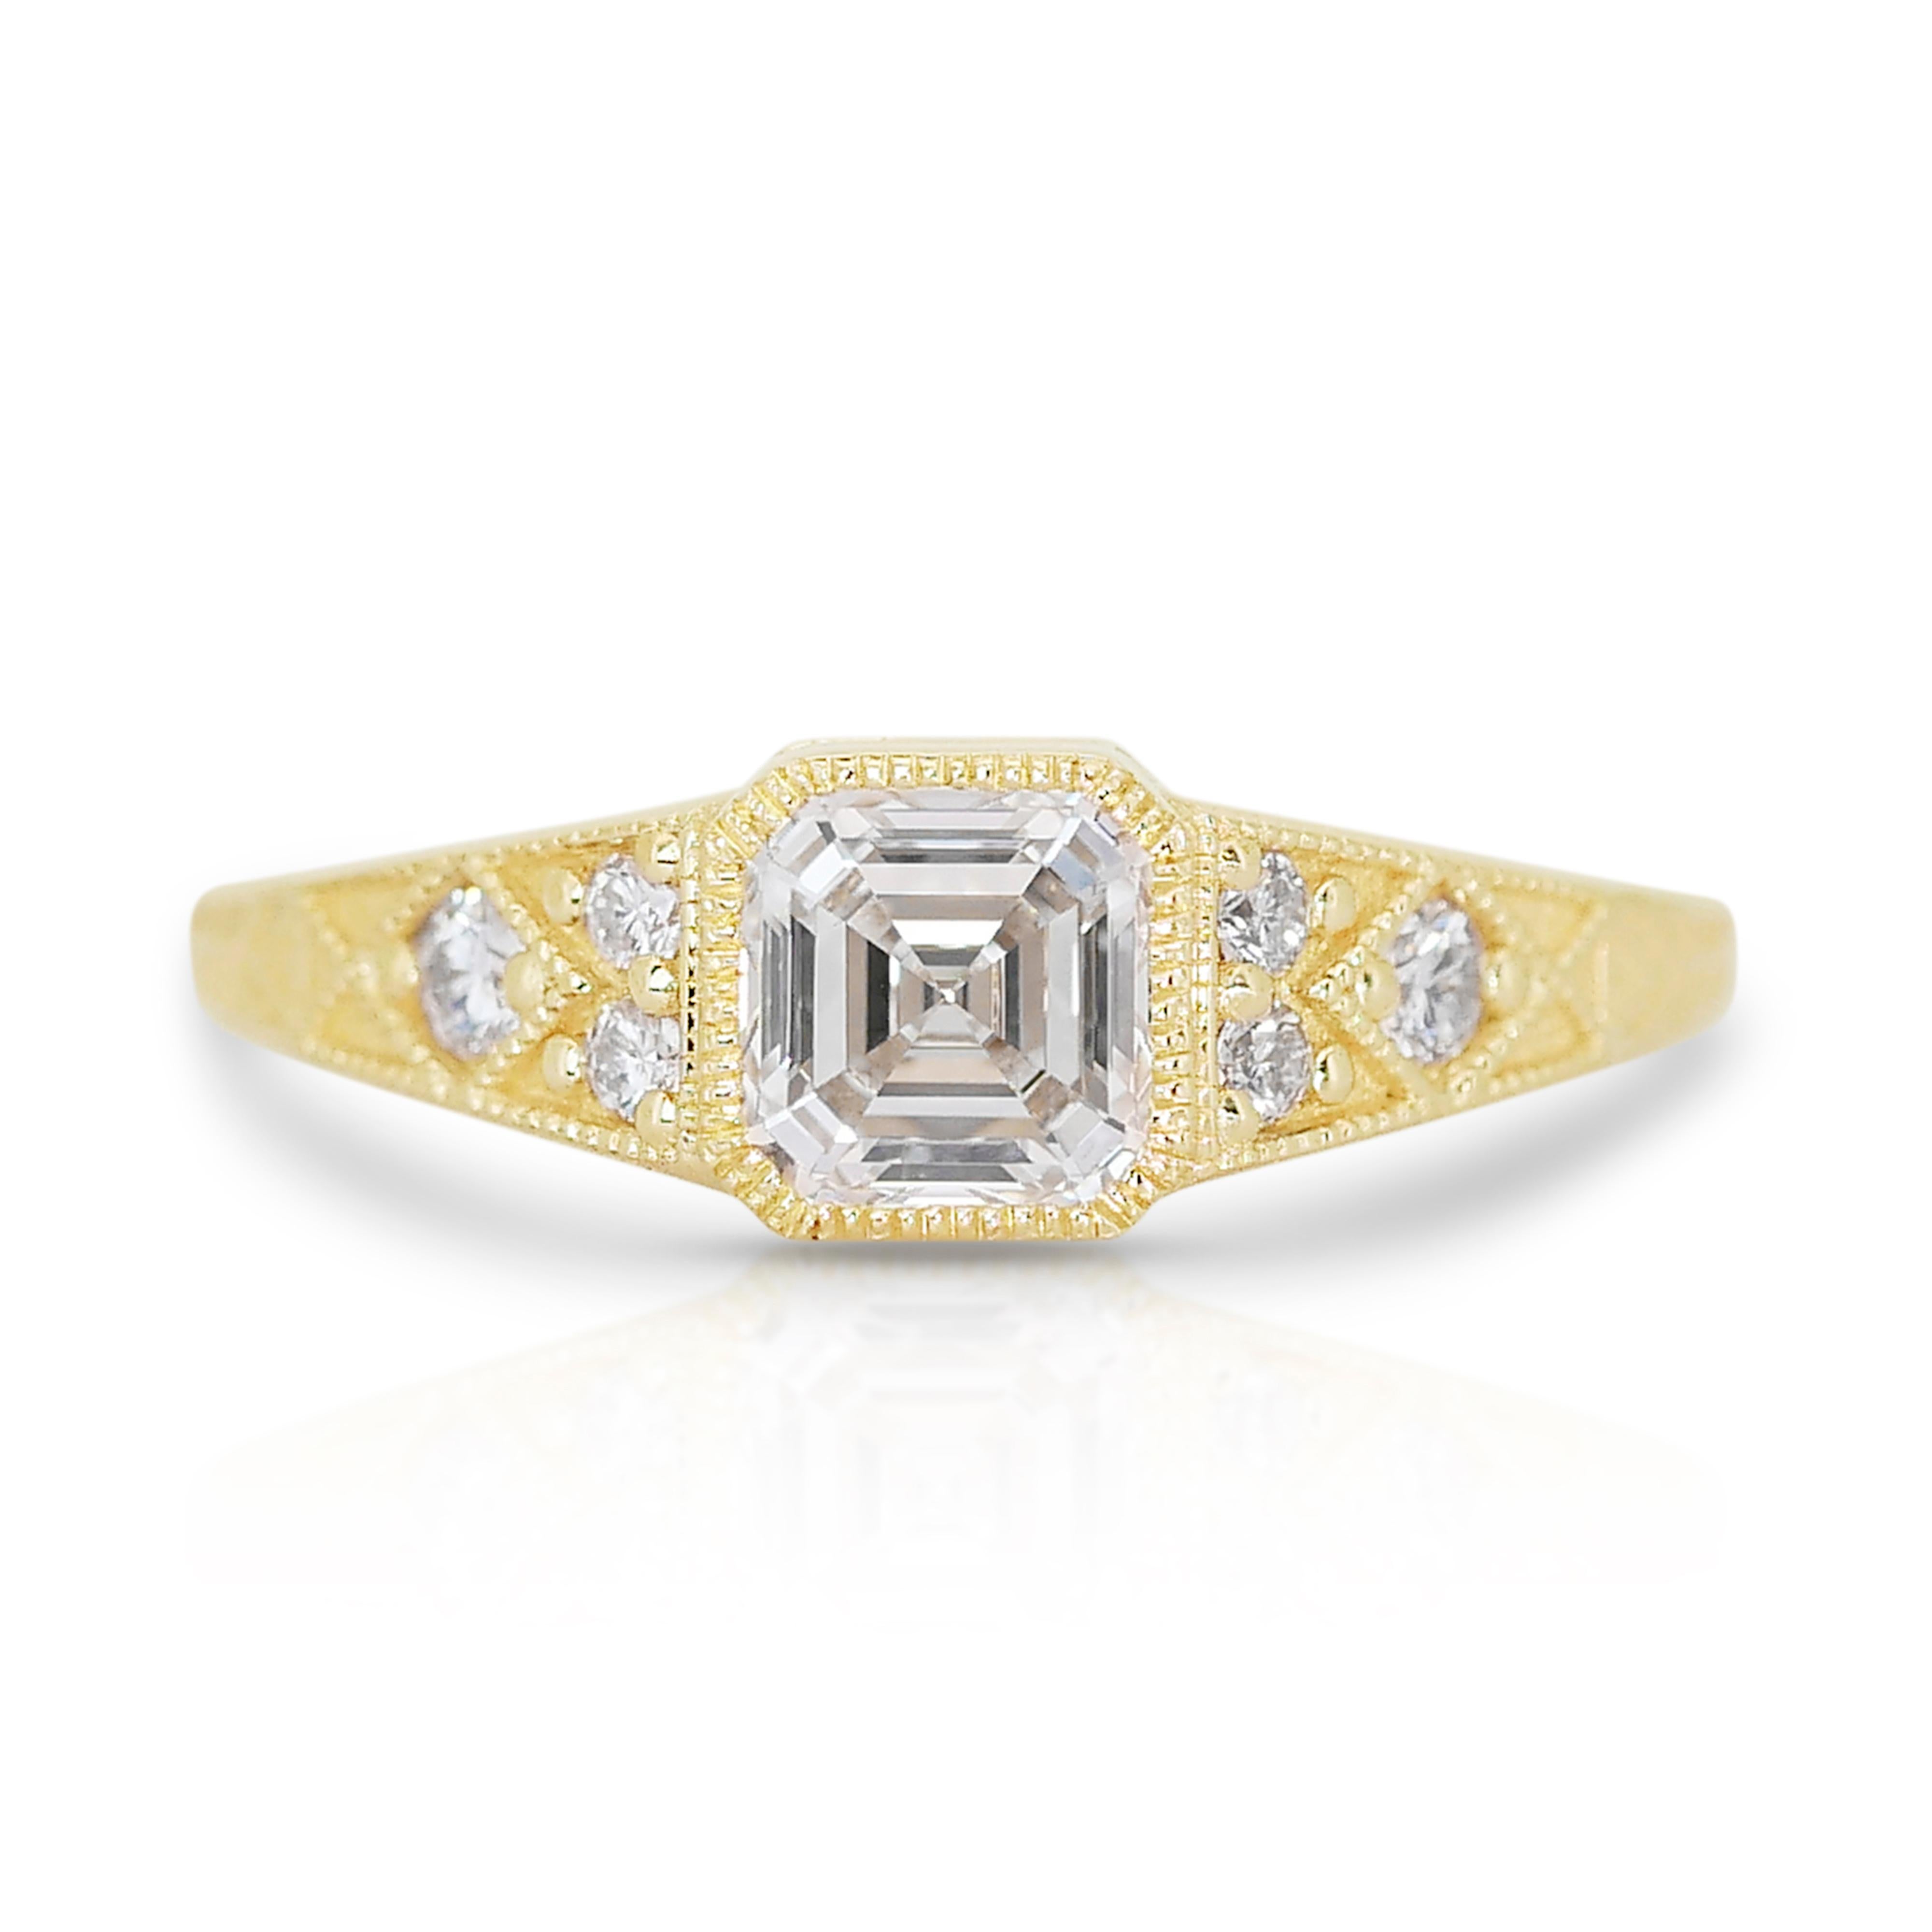 Beautiful 1.17ct Diamonds Pave Ring in 18k Yellow Gold - GIA Certified For Sale 3